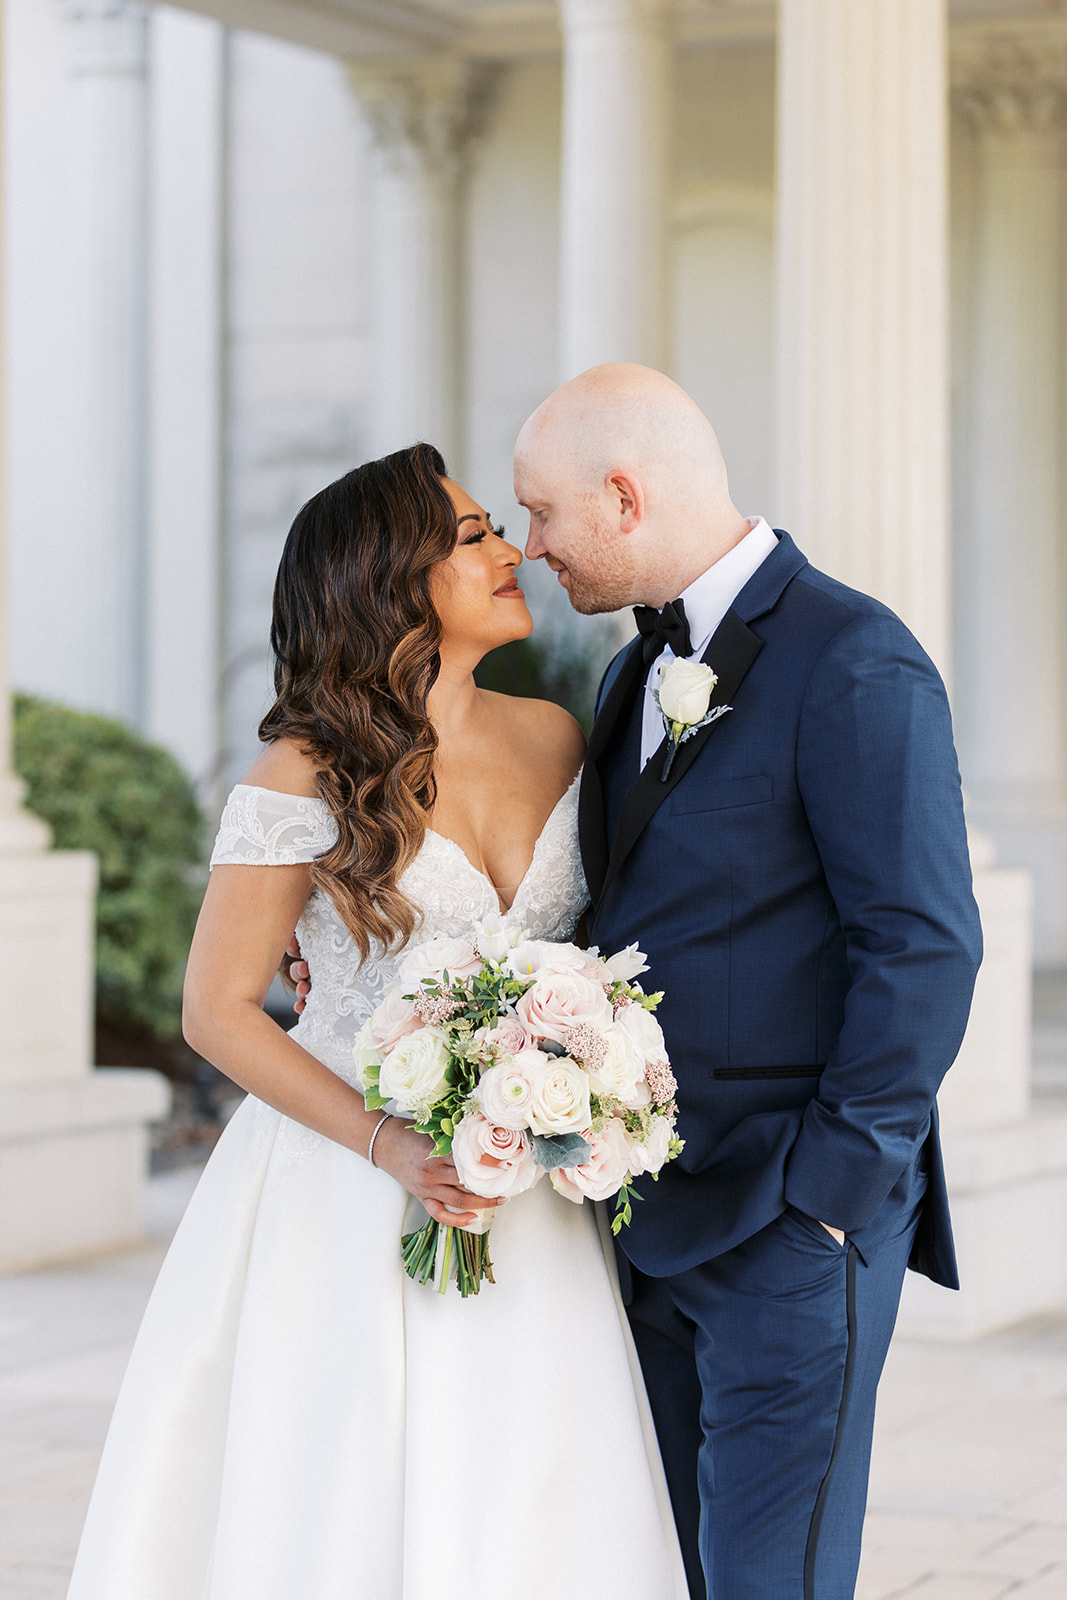 Newlyweds lean in for a kiss while standing in an ornate car port in a blue suit and white lace dress